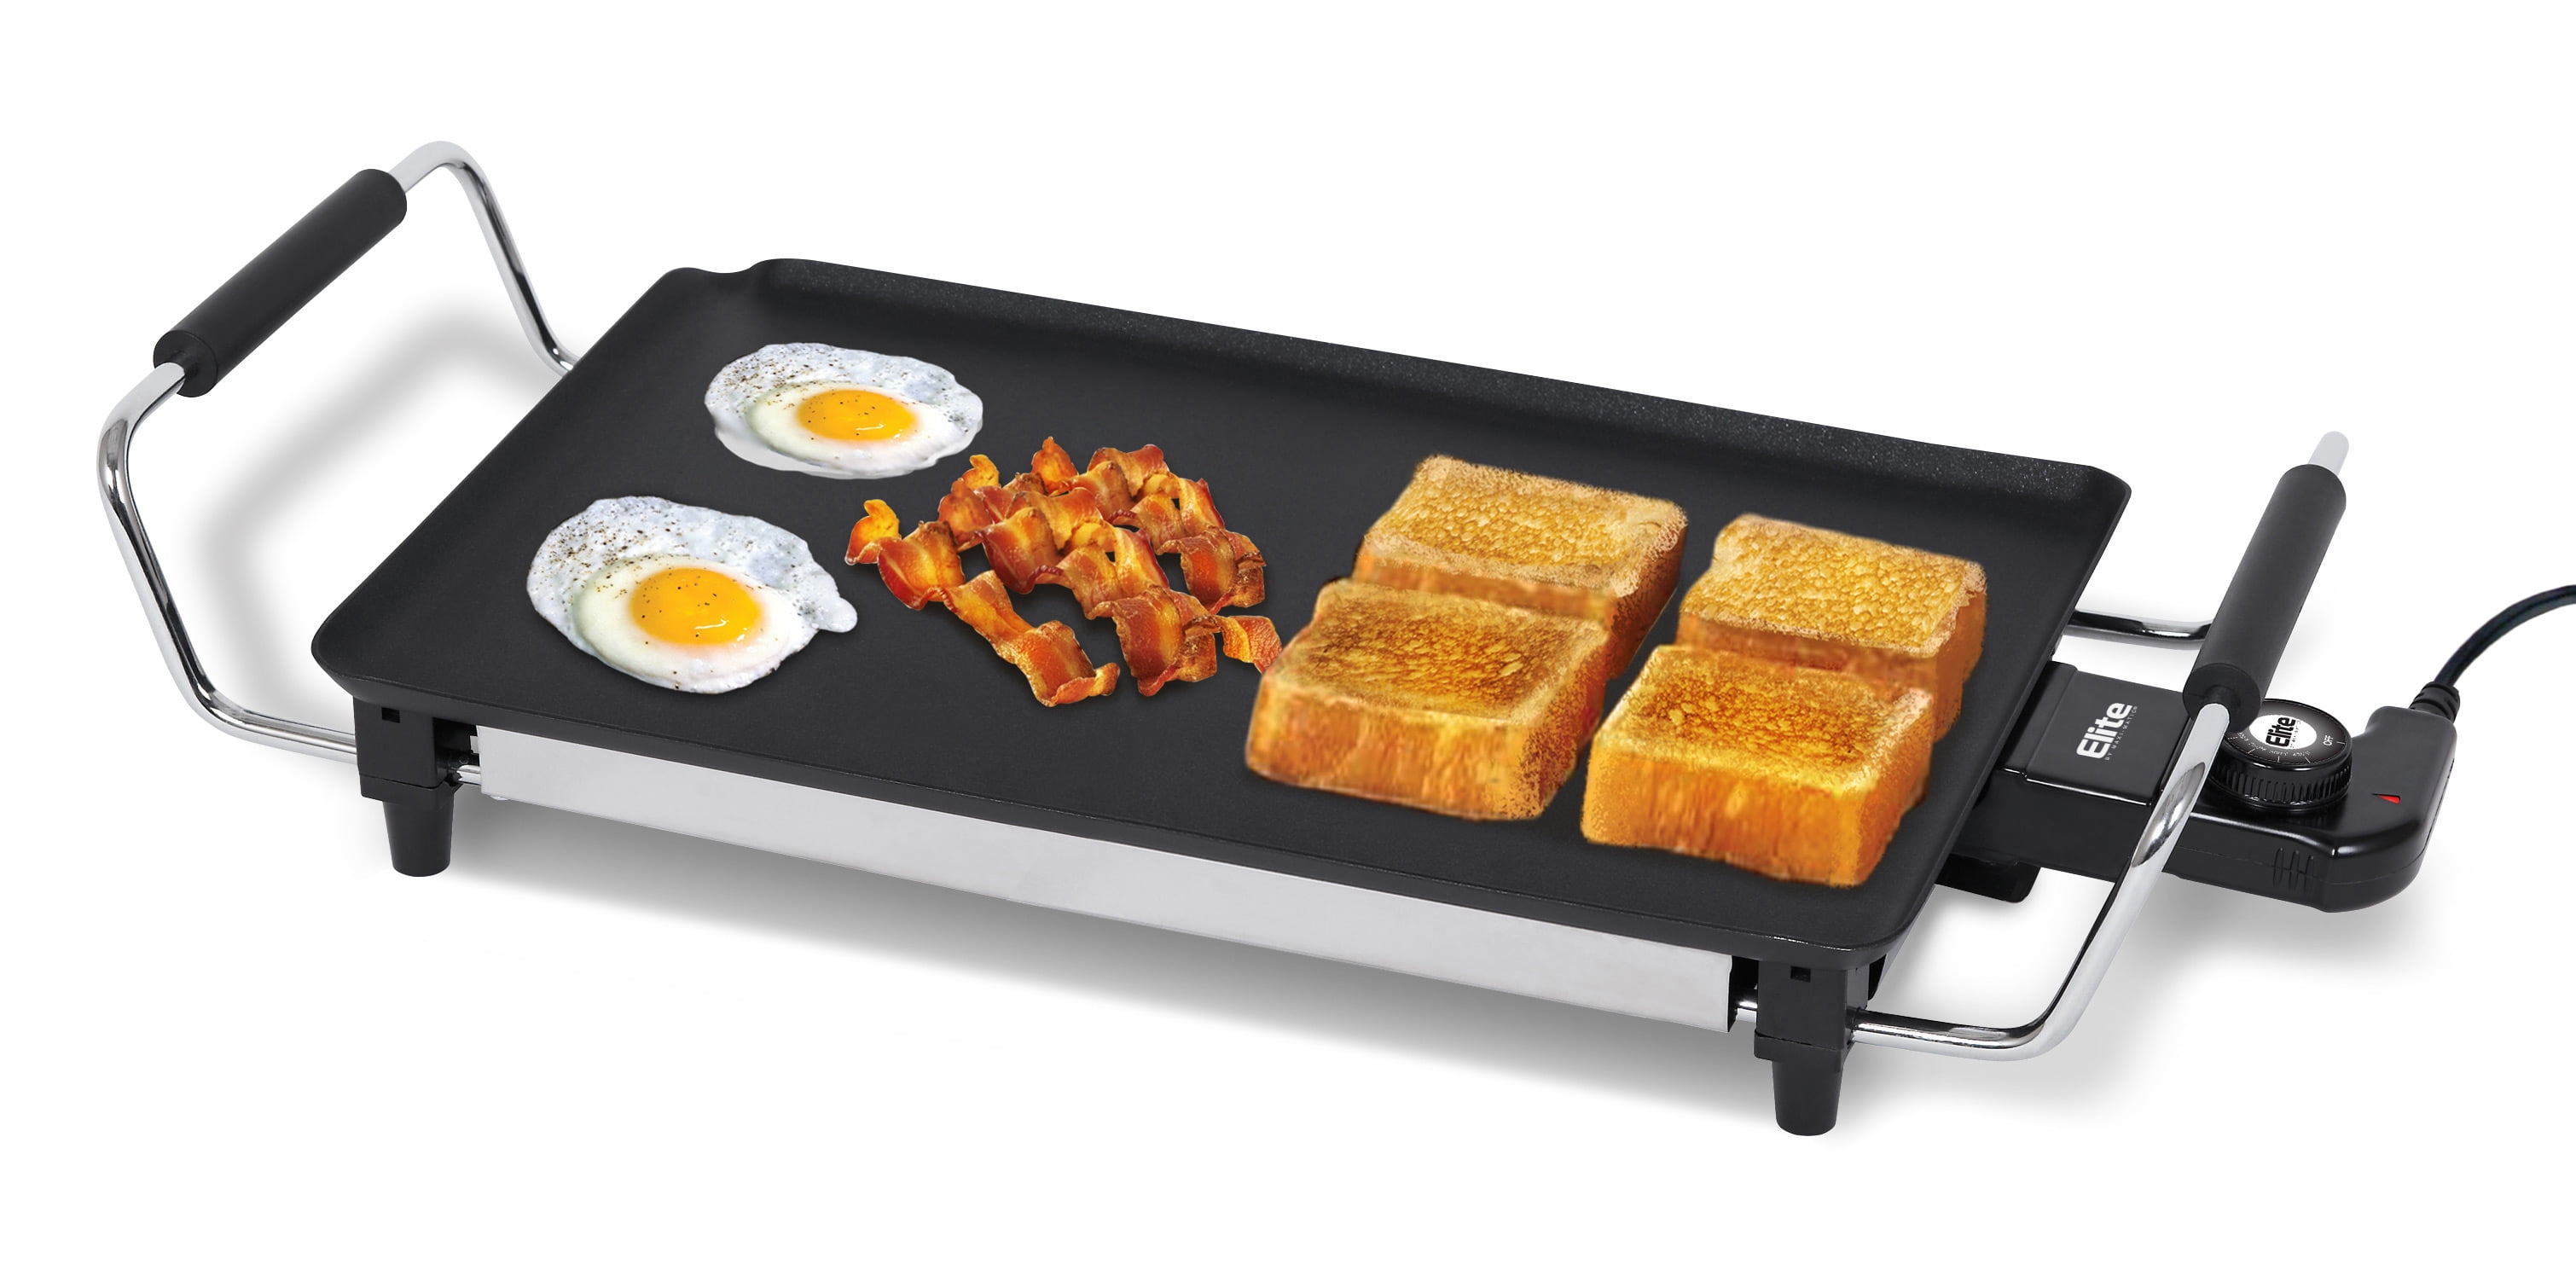 Equipex Adventys Induction Griddle countertop 25W x 12-1/2D multilayer  griddle surface